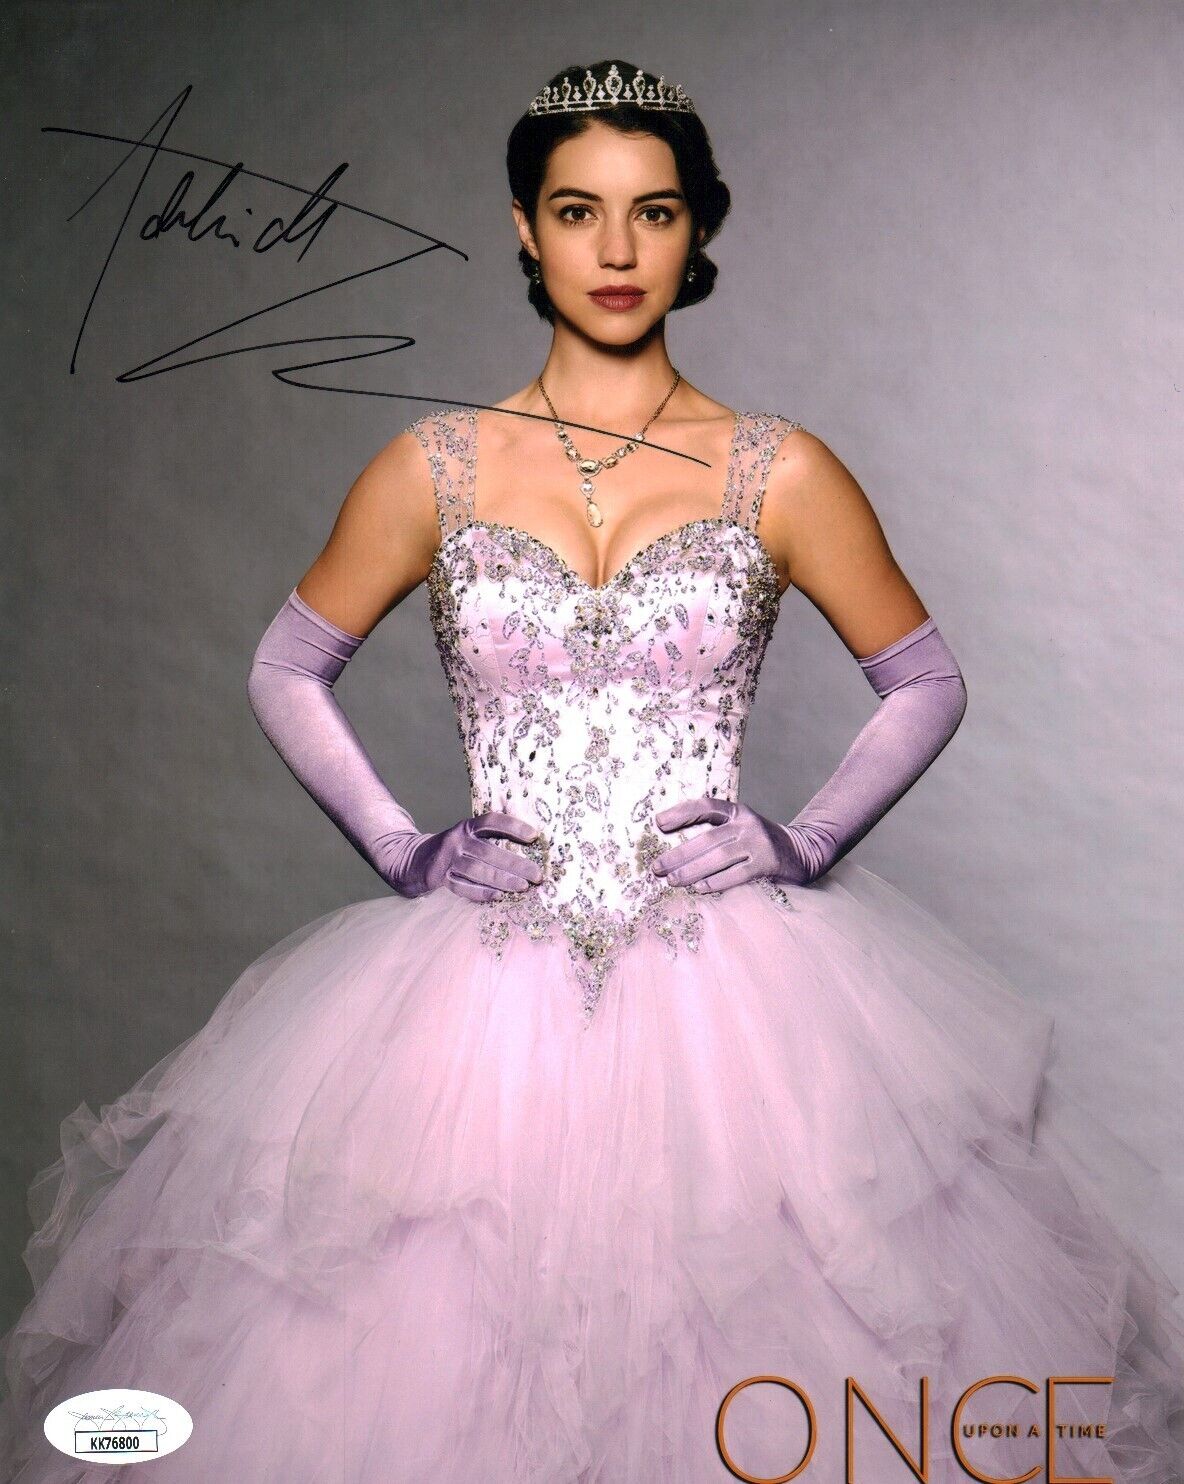 Adelaide Kane Once Upon A Time 8x10 Signed Photo JSA COA Certified Autograph